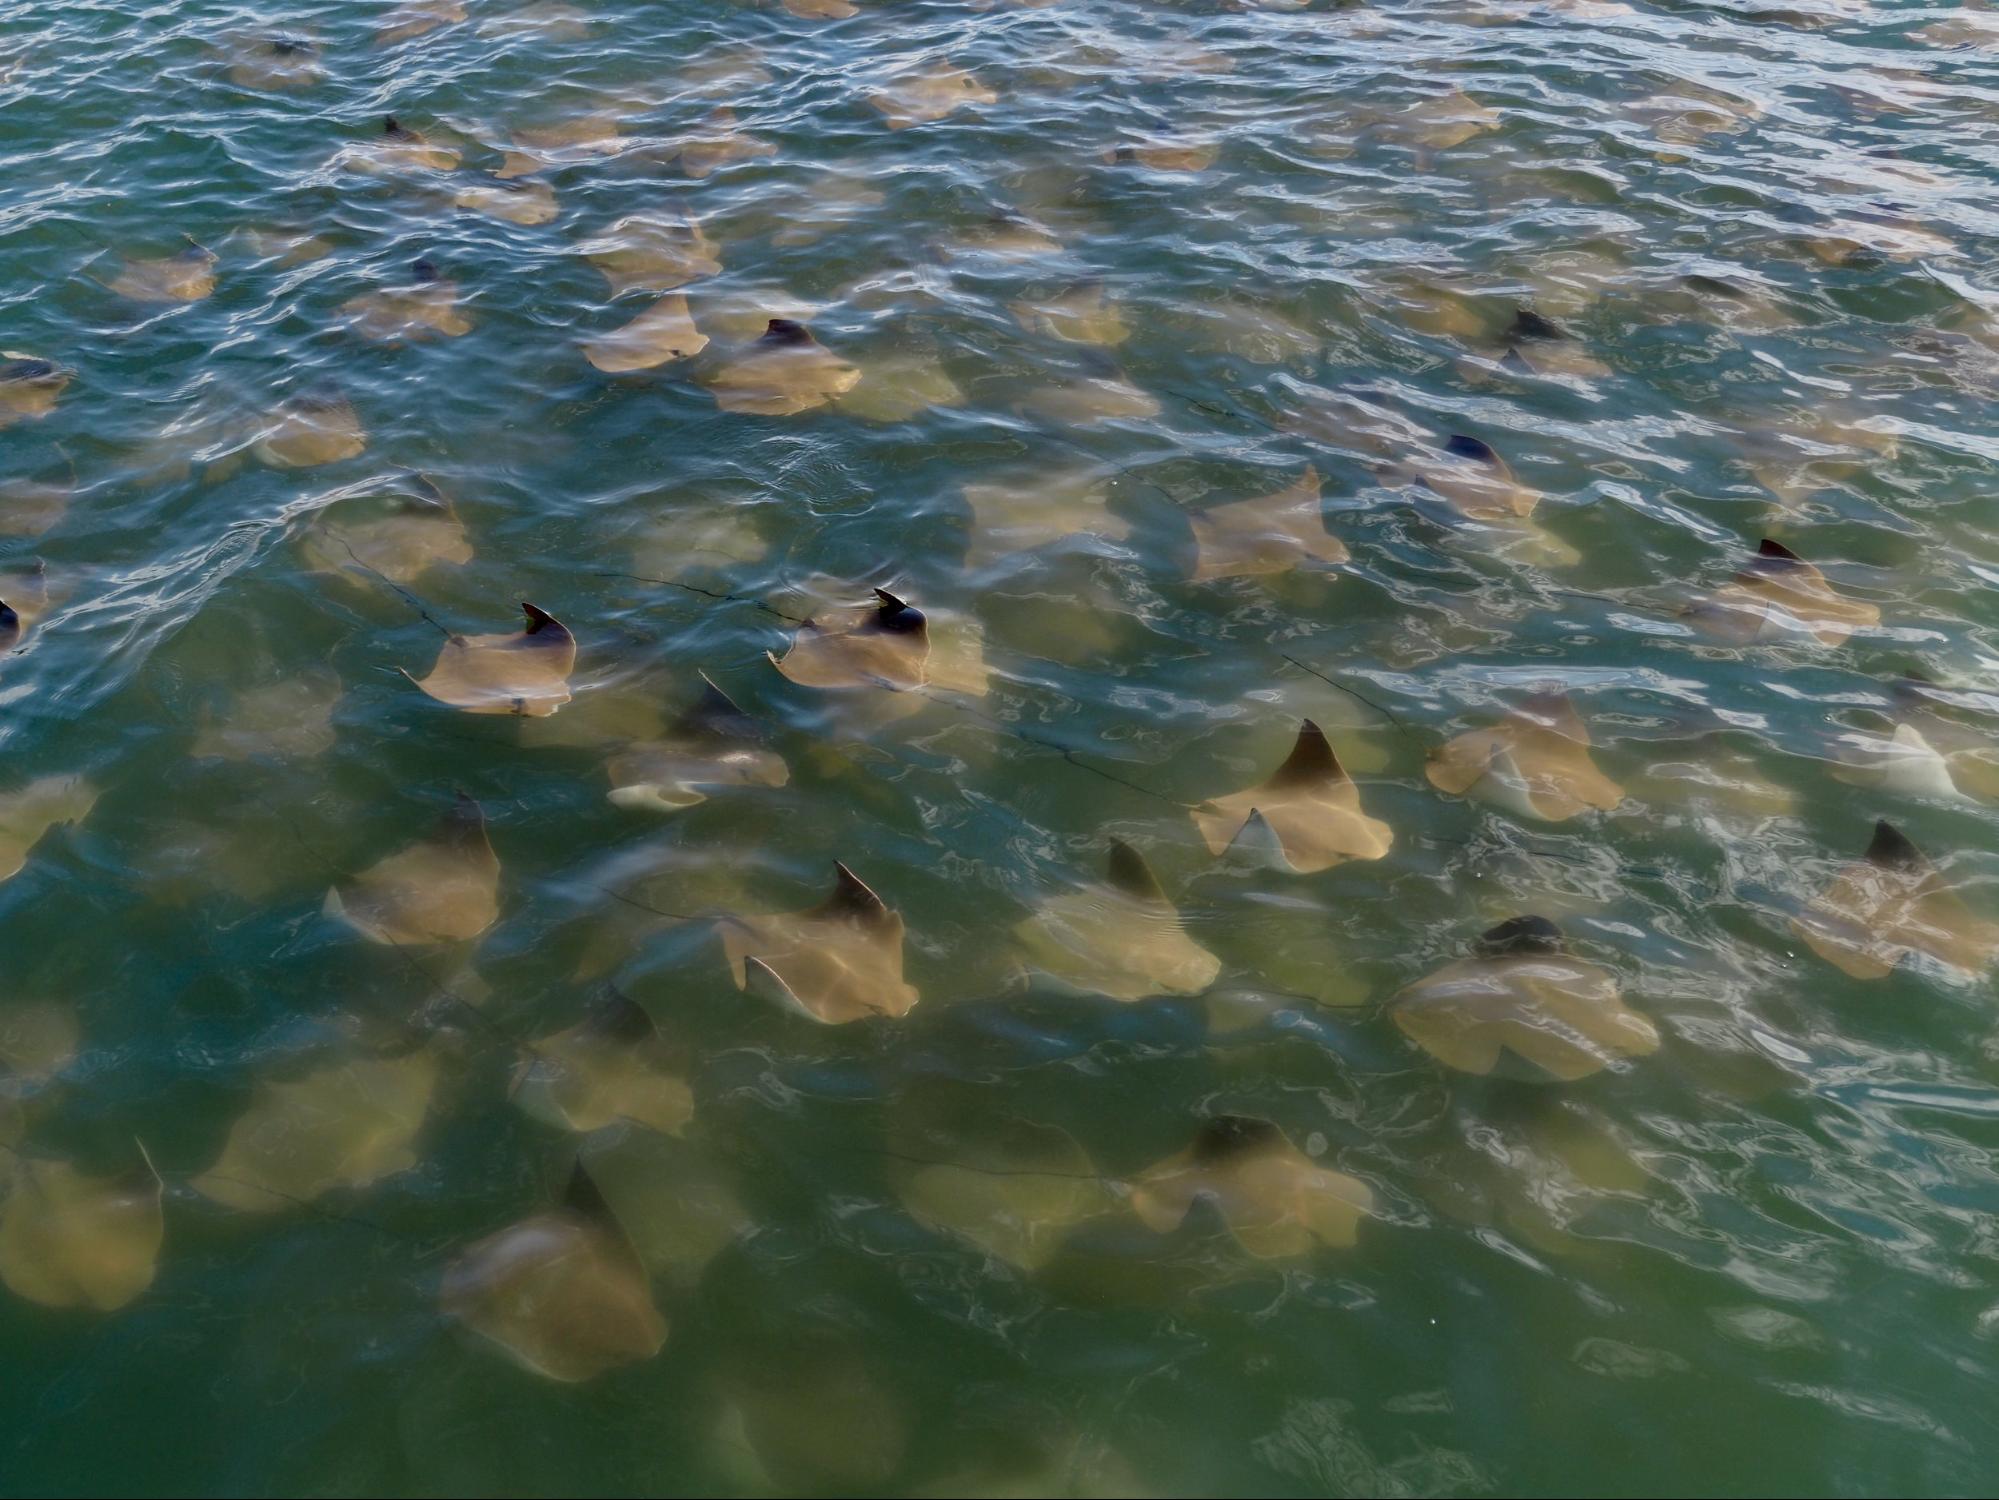 Many cow nosed rays